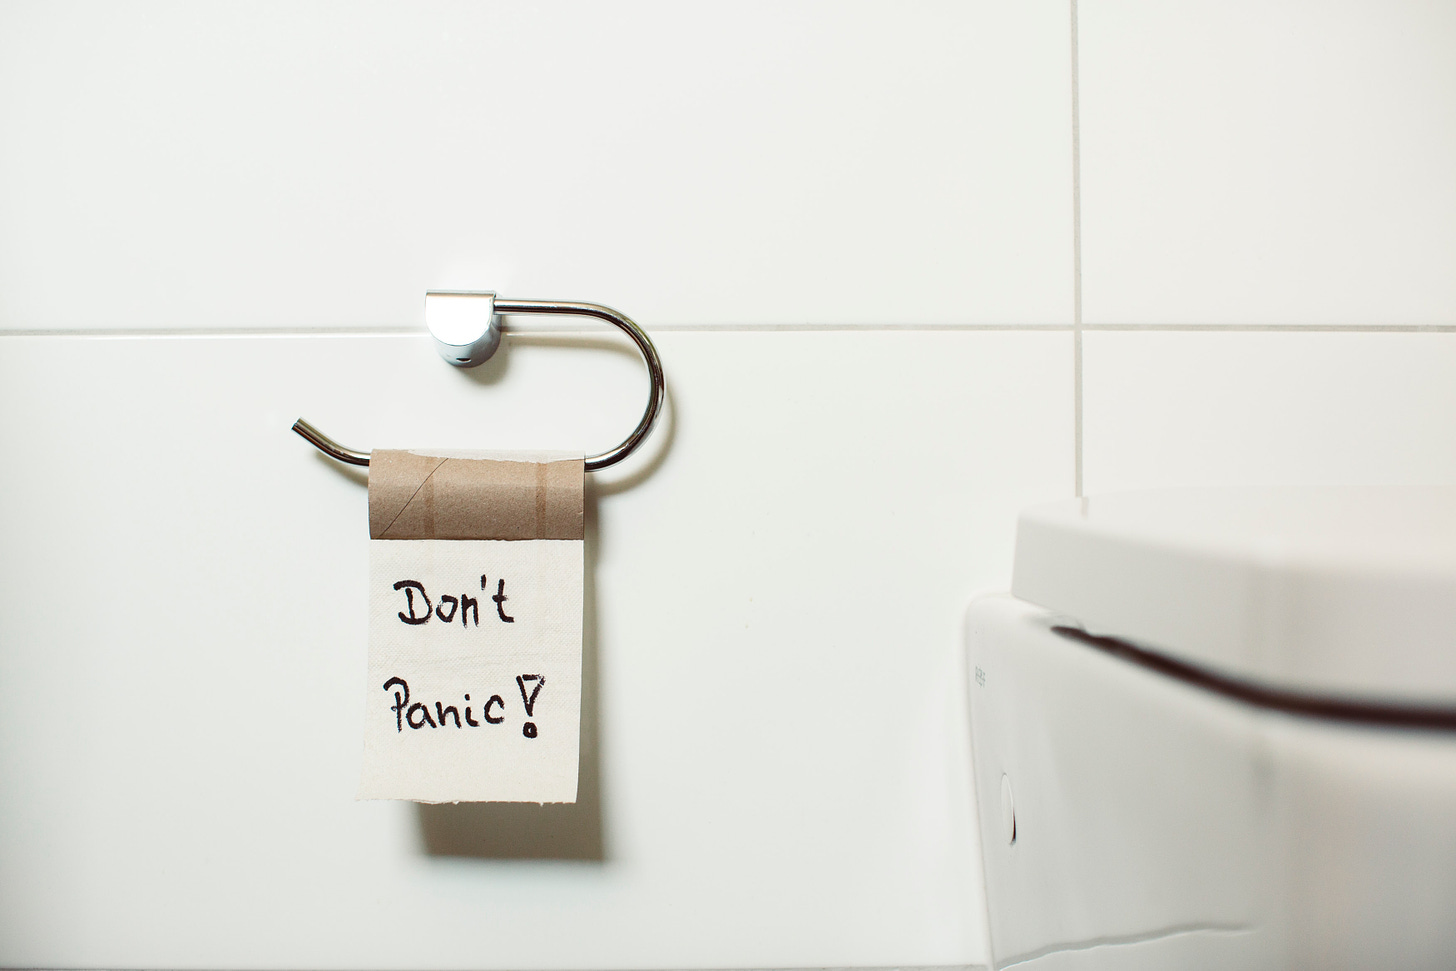 Just one sheet of toilet paper is left on the roll and it has ‘Don’t panic!’ written on it. (Photo by Markus Spiske on Unsplash)